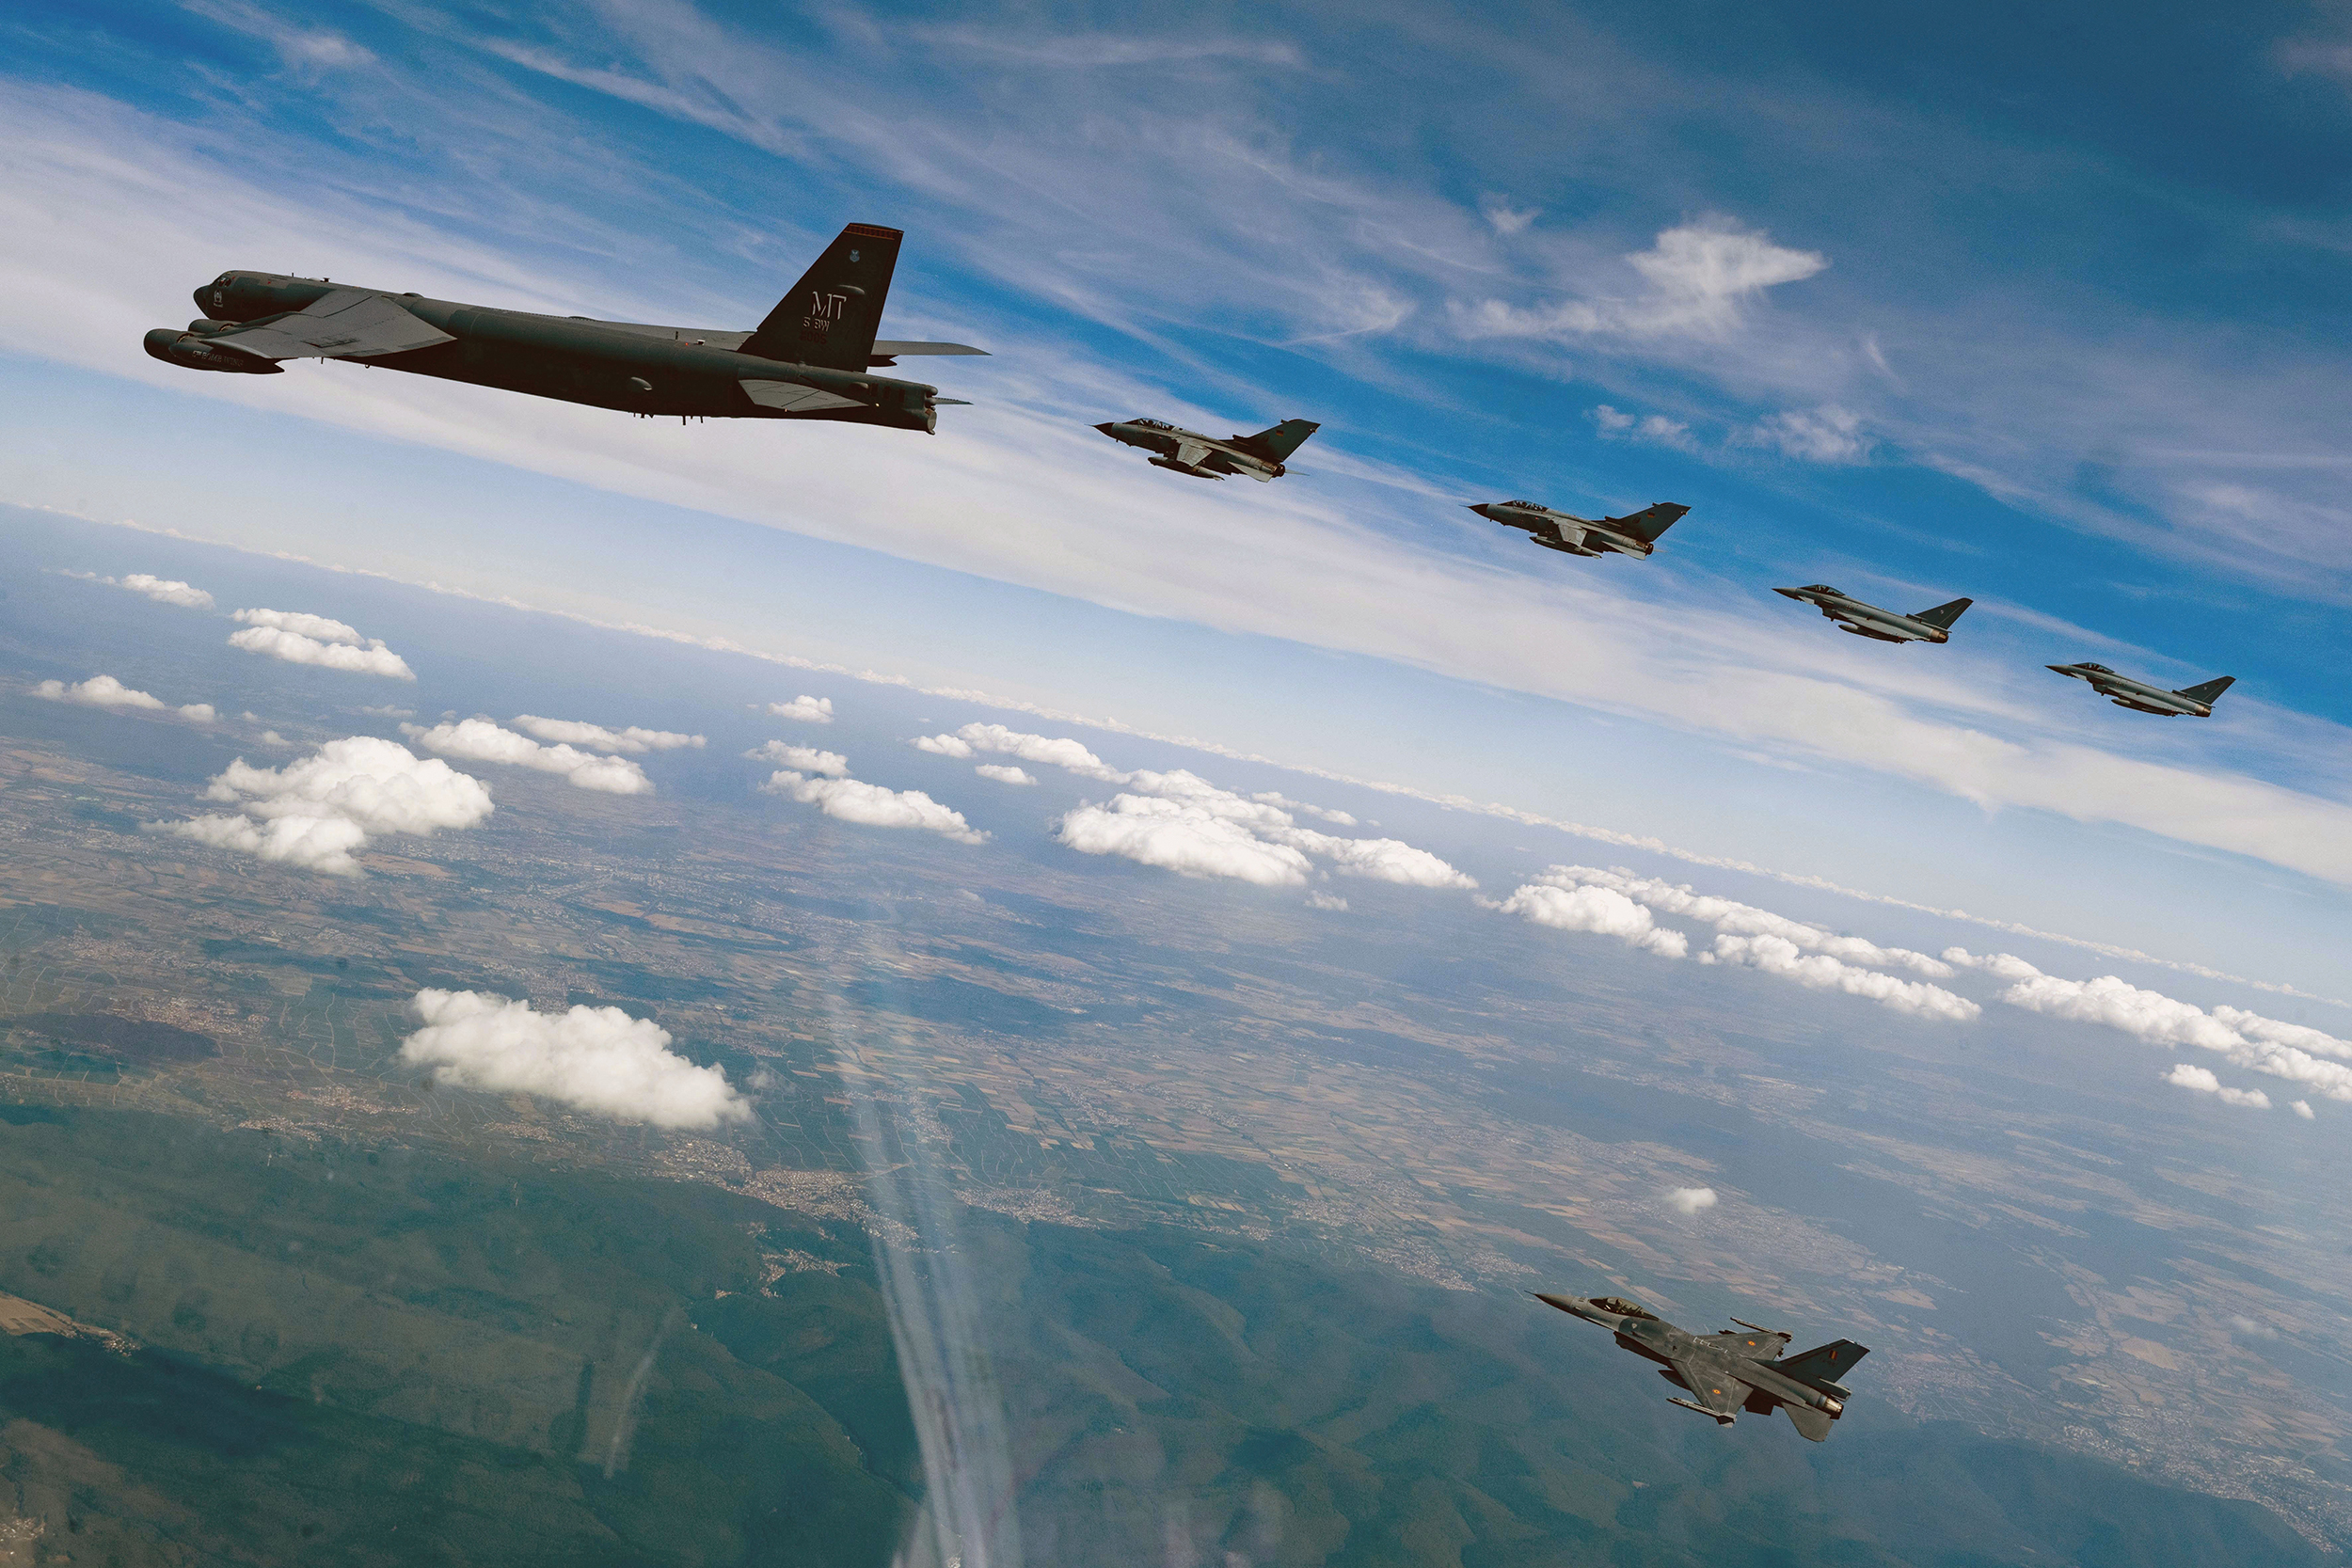 U.S. Air Force 23rd Bomb Squadron B-52H Stratofortress, two German air force Panavia Tornados followed by two German air force Eurofighter Typhoons, and one Belgian air force F-16 Fighting Falcon fly in formation over Germany during Bomber Task Force mission